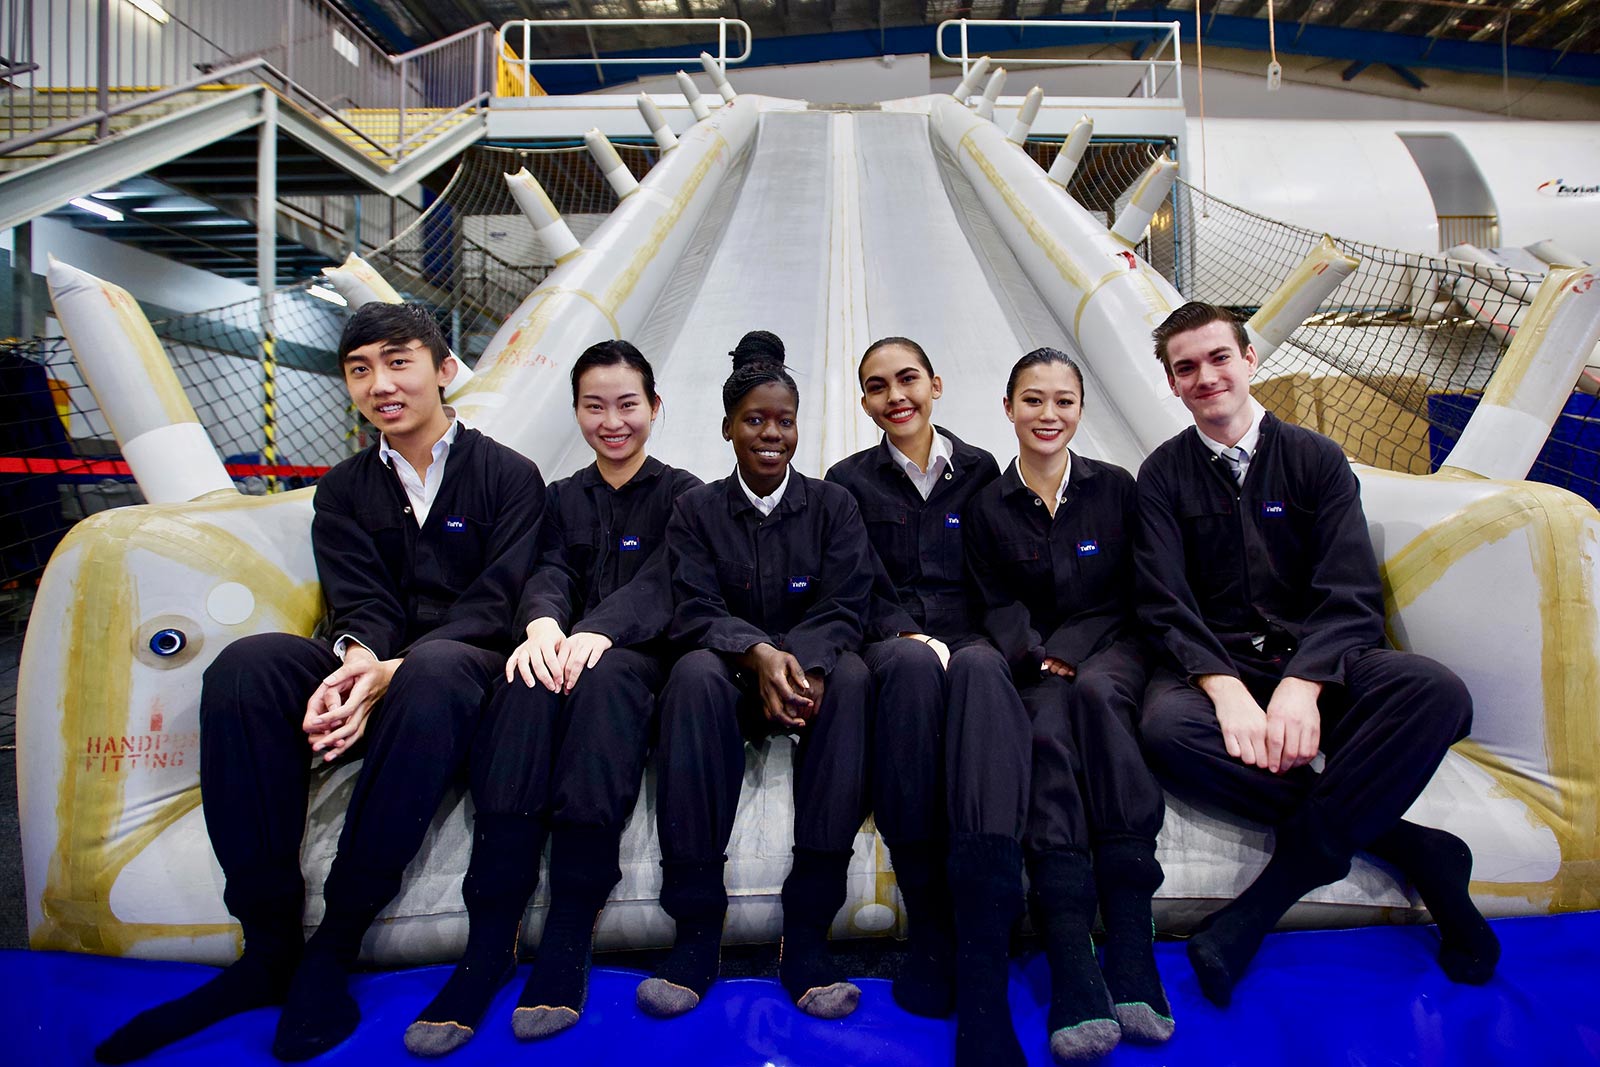 A group of budding Cabin Crew ready for their careers to take off